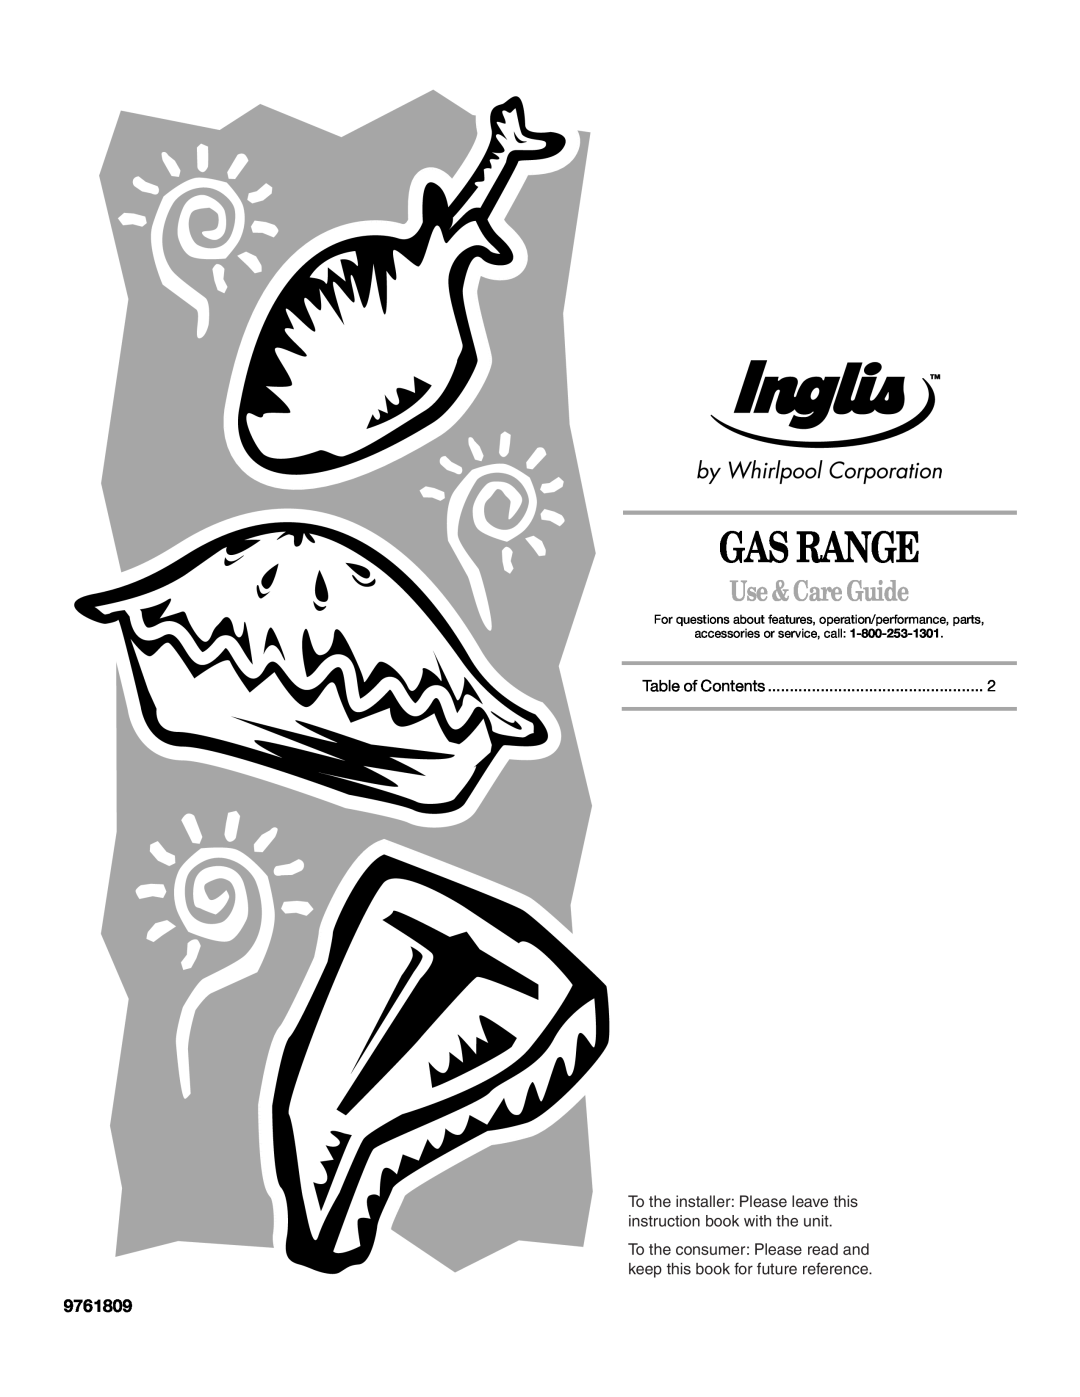 Whirlpool IGS325RQ0 manual Gas Range, Use & Care Guide, 9761809, accessories or service, call 